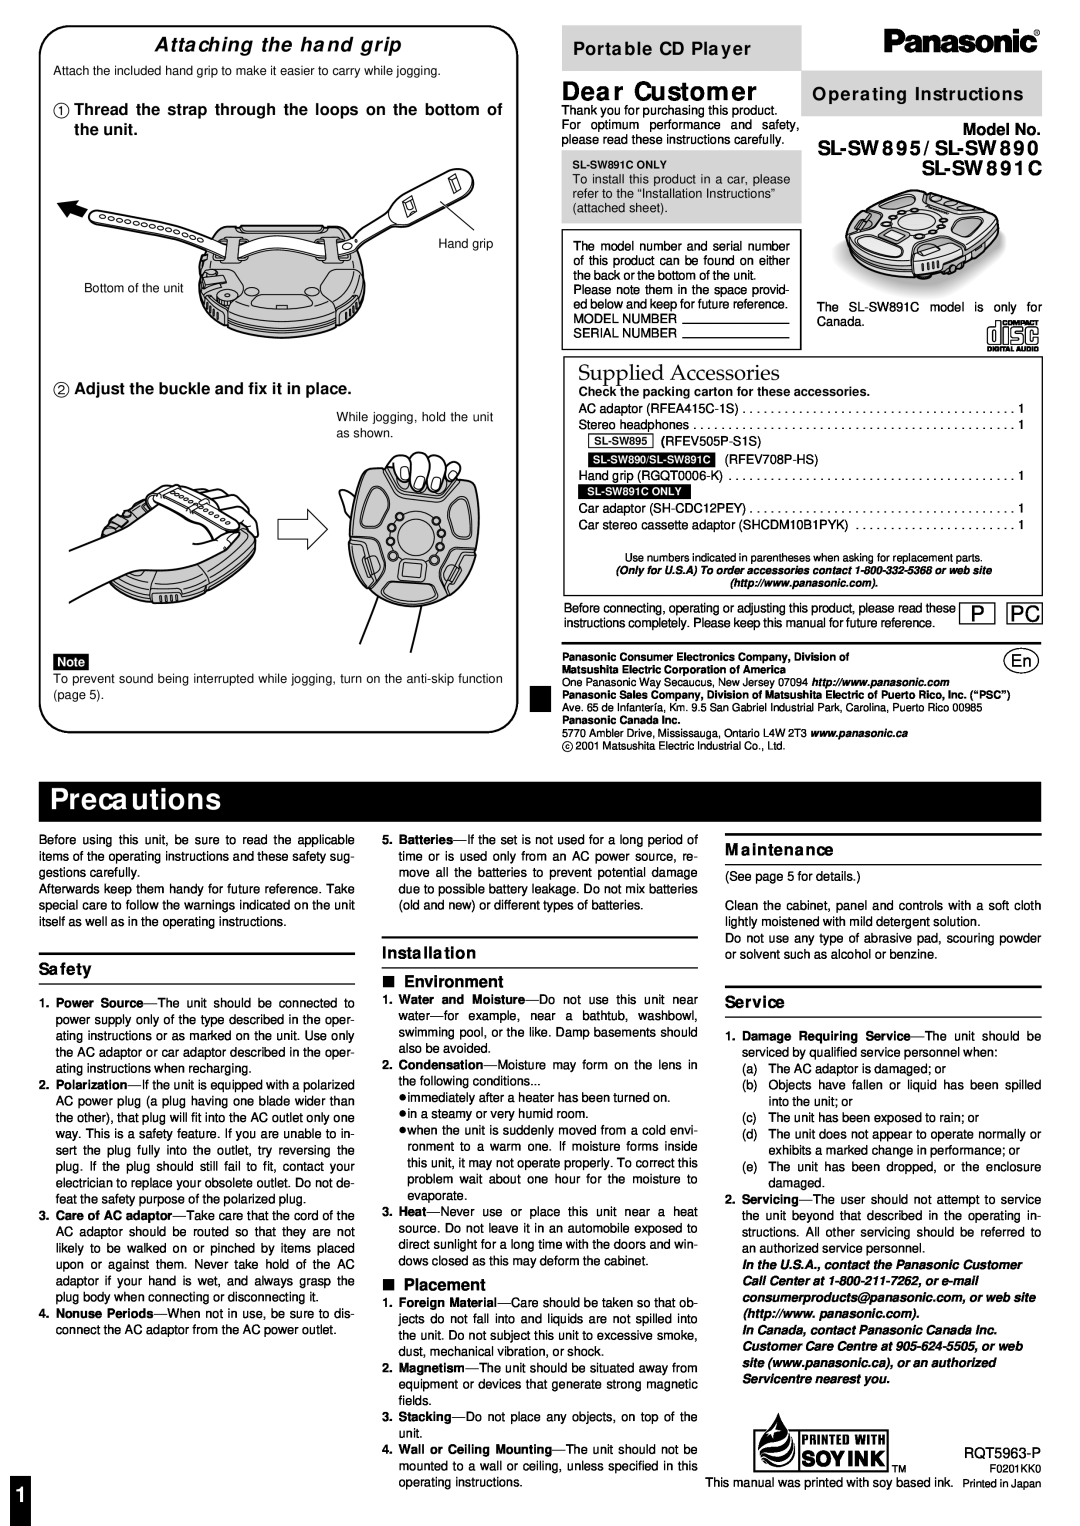 Panasonic SL-SW895 installation instructions Precautions, Supplied Accessories, Attaching the hand grip, Model No, Safety 